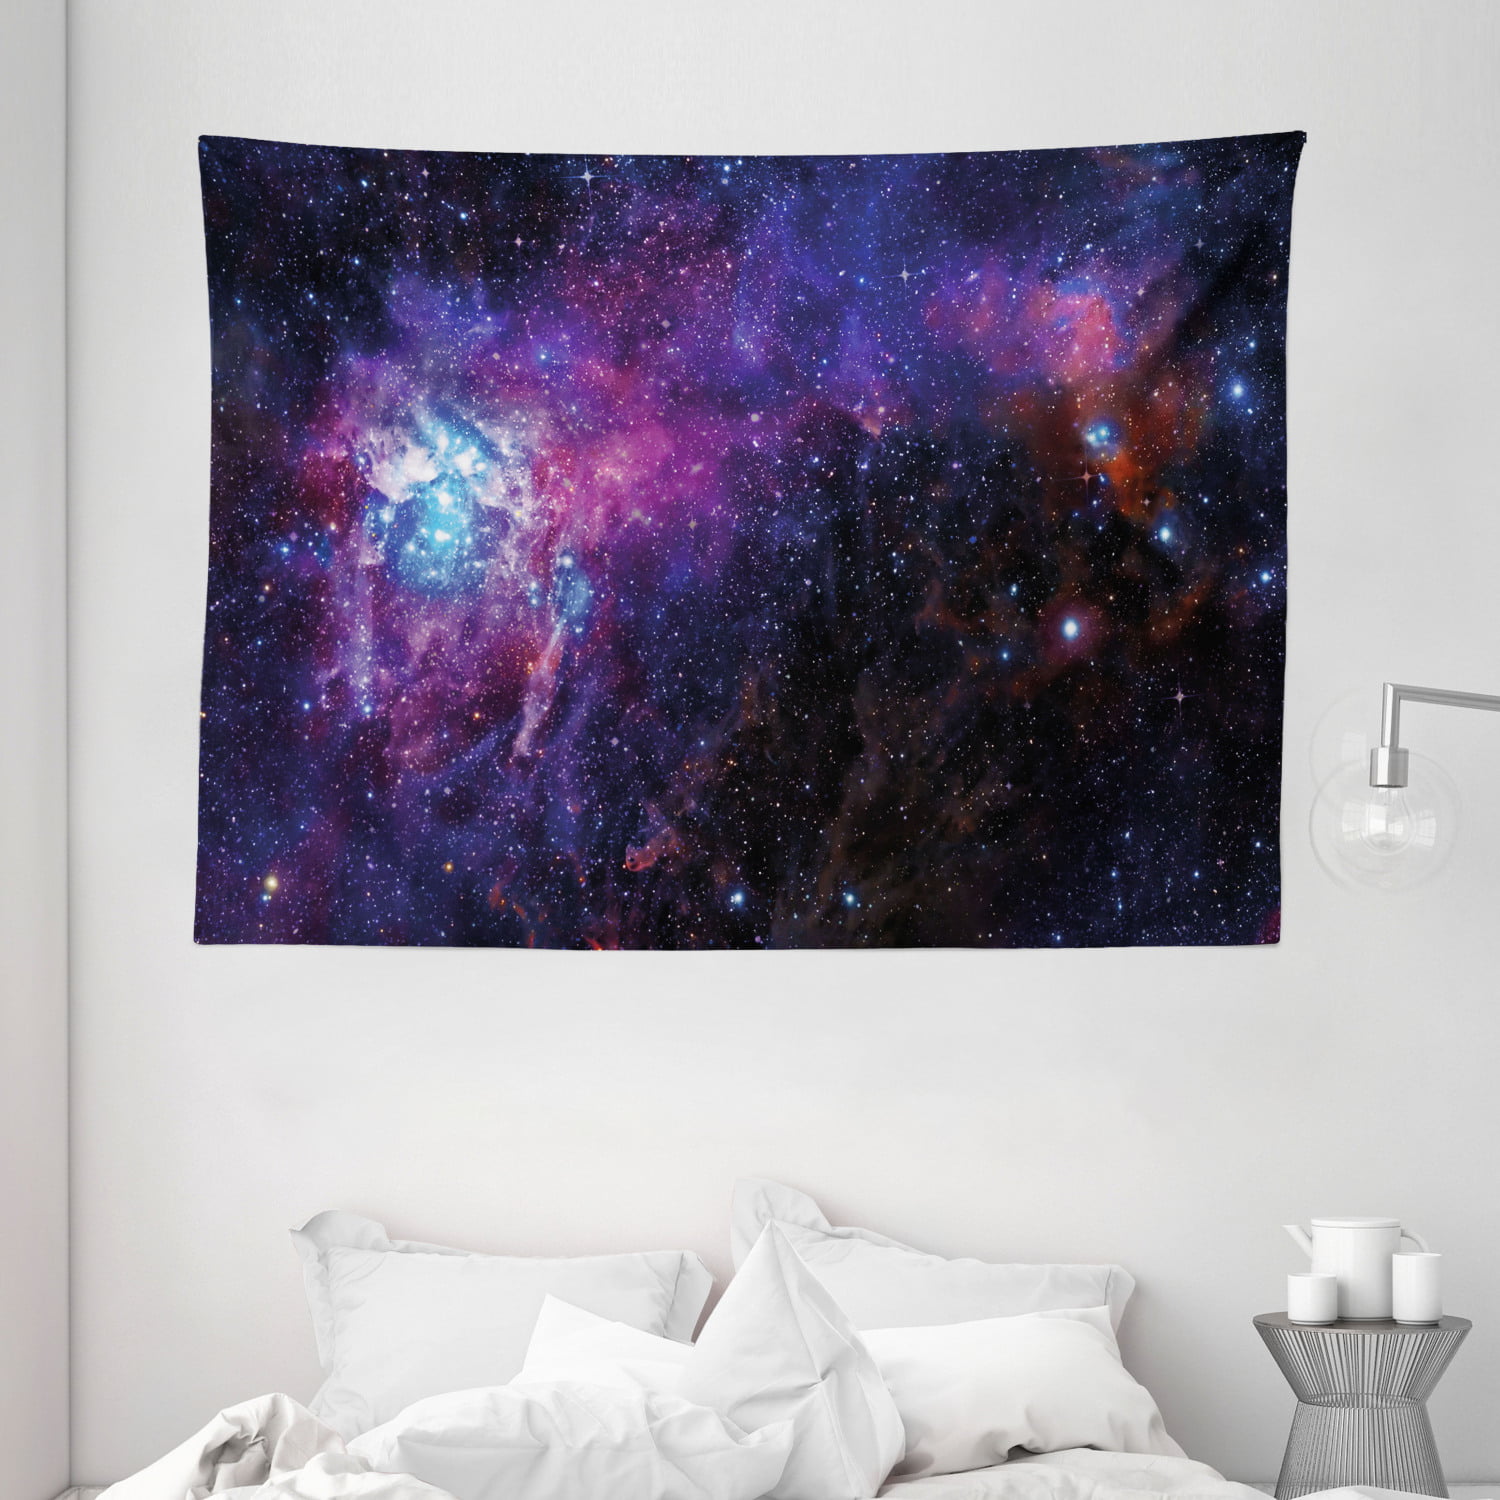 Galaxy Tapestry, Starry Night Nebula Cloud Celestial Theme Image Space  Decorations Art Print, Wall Hanging for Bedroom Living Room Dorm Decor, 80W  X 